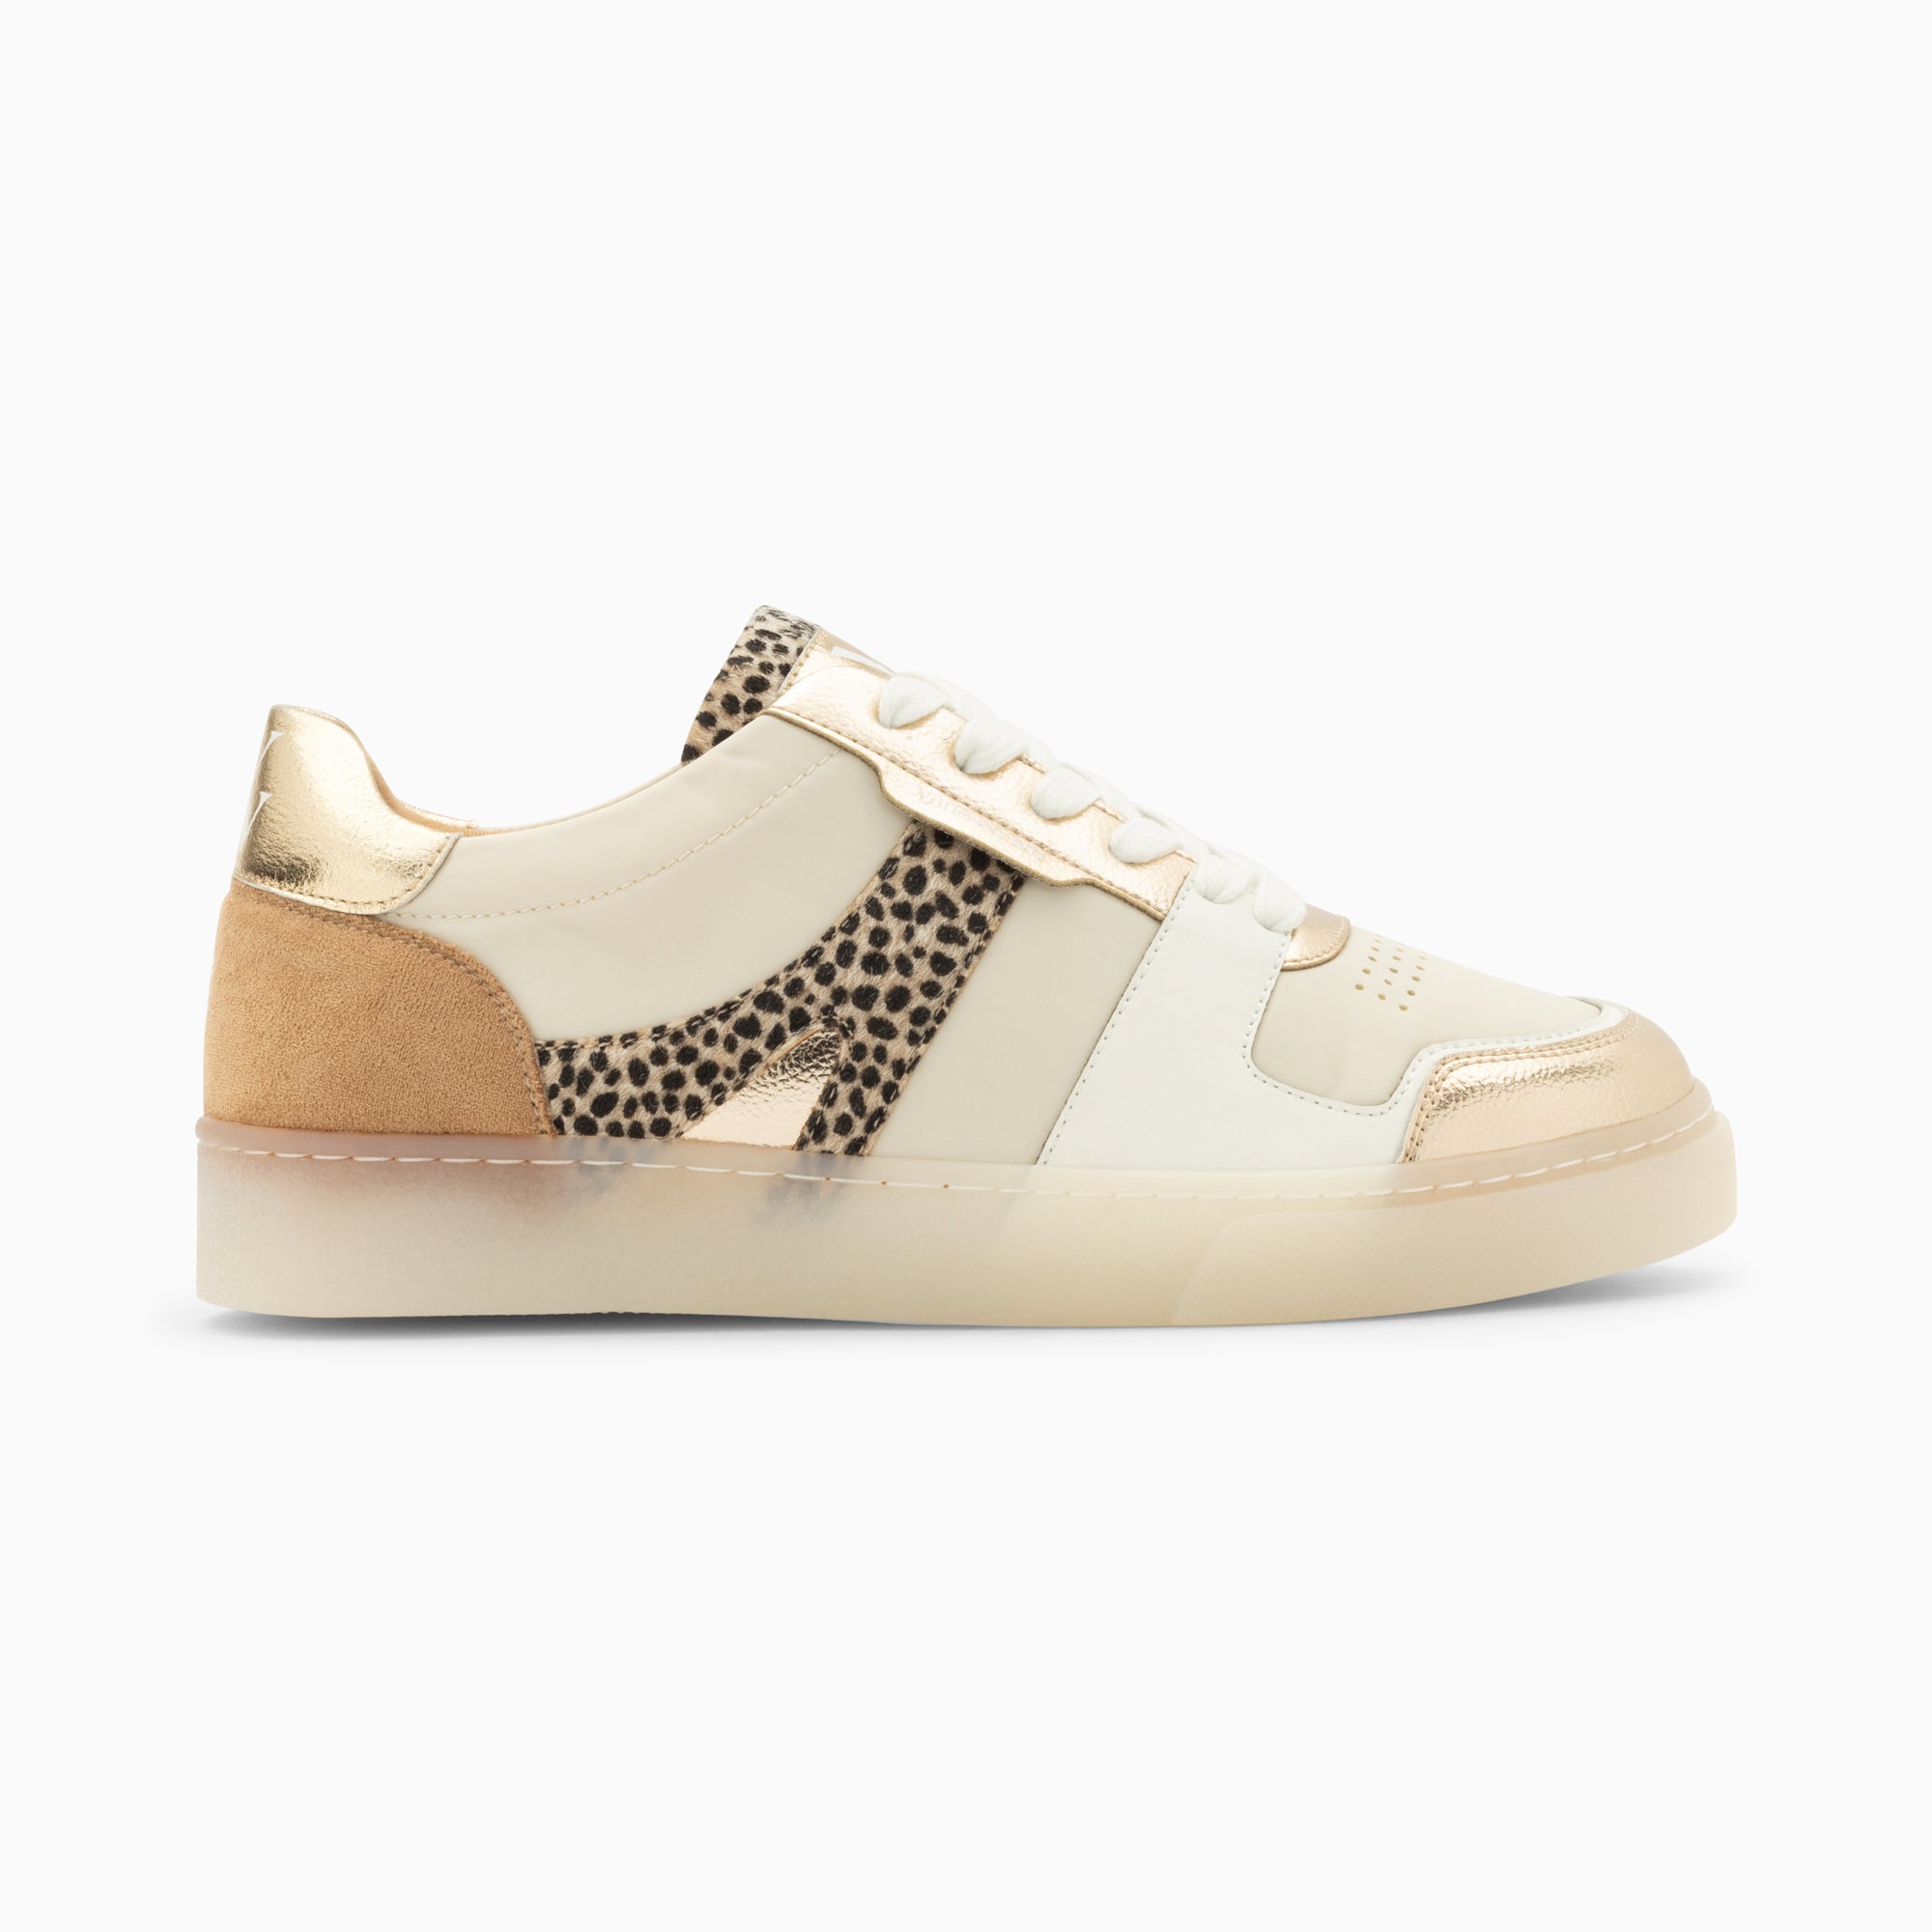 White Girls' Beaded Sole Lace-Up Sneakers - CHARLES & KEITH KW